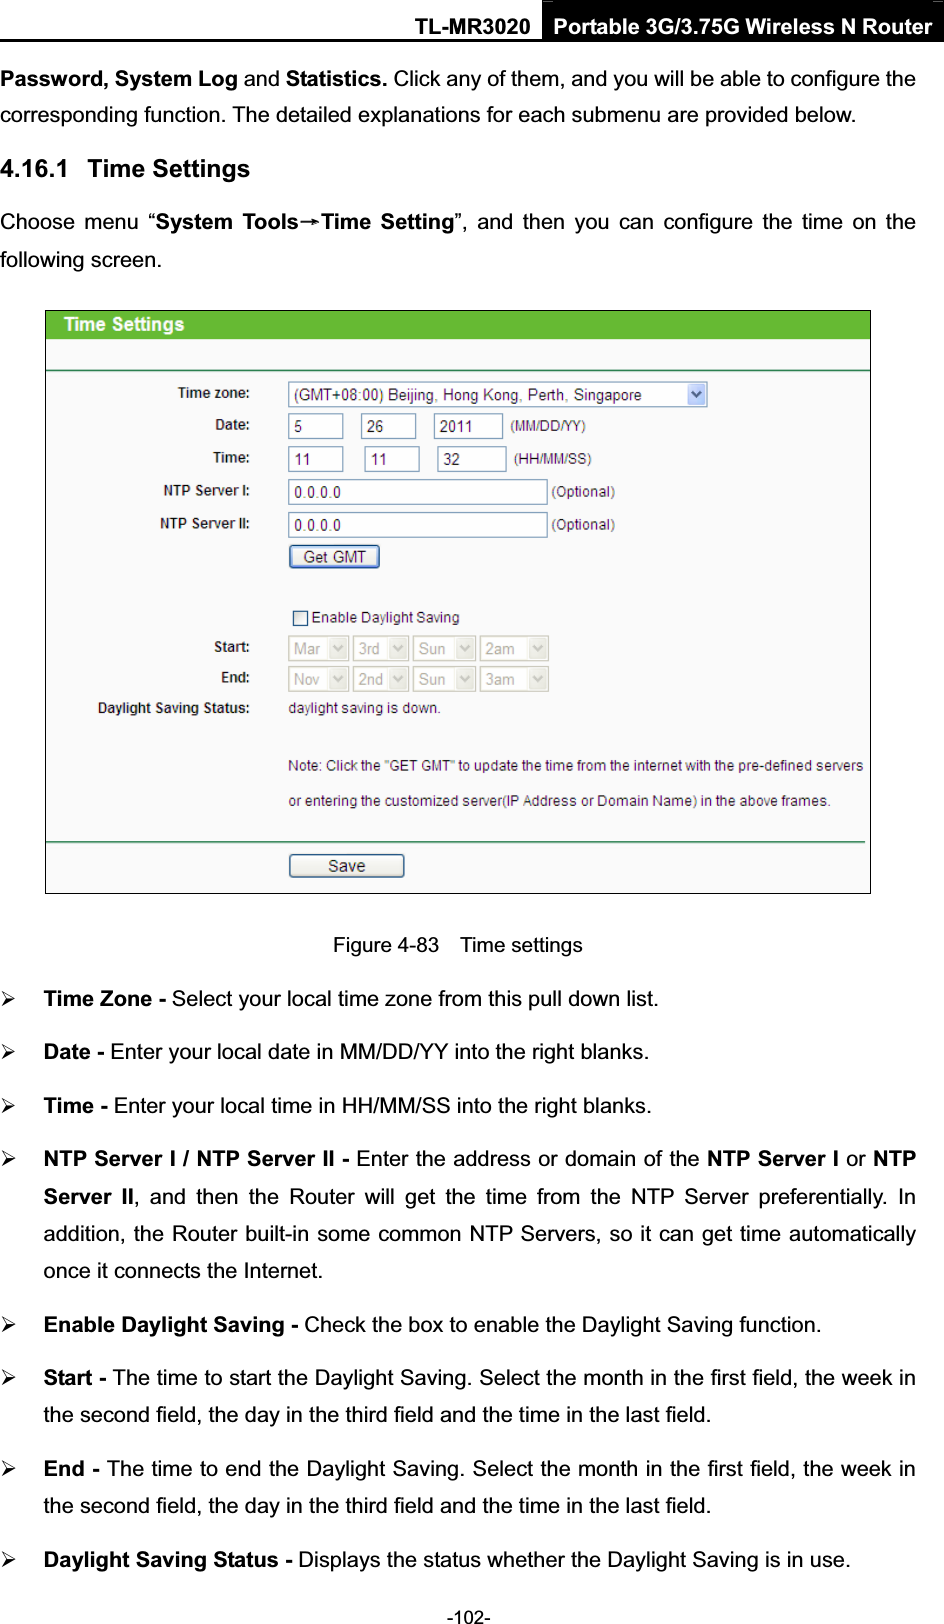 TL-MR3020 Portable 3G/3.75G Wireless N Router-102-Password, System Log and Statistics. Click any of them, and you will be able to configure the corresponding function. The detailed explanations for each submenu are provided below. 4.16.1 Time Settings Choose  menu  “System  ToolsėTime  Setting”,  and  then  you  can  configure  the  time  on  the following screen. Figure 4-83    Time settings ¾Time Zone - Select your local time zone from this pull down list. ¾Date - Enter your local date in MM/DD/YY into the right blanks. ¾Time - Enter your local time in HH/MM/SS into the right blanks. ¾NTP Server I / NTP Server II - Enter the address or domain of the NTP Server I or NTP Server  II,  and  then  the  Router  will  get  the  time  from  the  NTP  Server  preferentially.  In addition, the Router built-in some common NTP Servers, so it can get time automatically once it connects the Internet.¾Enable Daylight Saving - Check the box to enable the Daylight Saving function. ¾Start - The time to start the Daylight Saving. Select the month in the first field, the week in the second field, the day in the third field and the time in the last field.¾End - The time to end the Daylight Saving. Select the month in the first field, the week in the second field, the day in the third field and the time in the last field.¾Daylight Saving Status - Displays the status whether the Daylight Saving is in use.